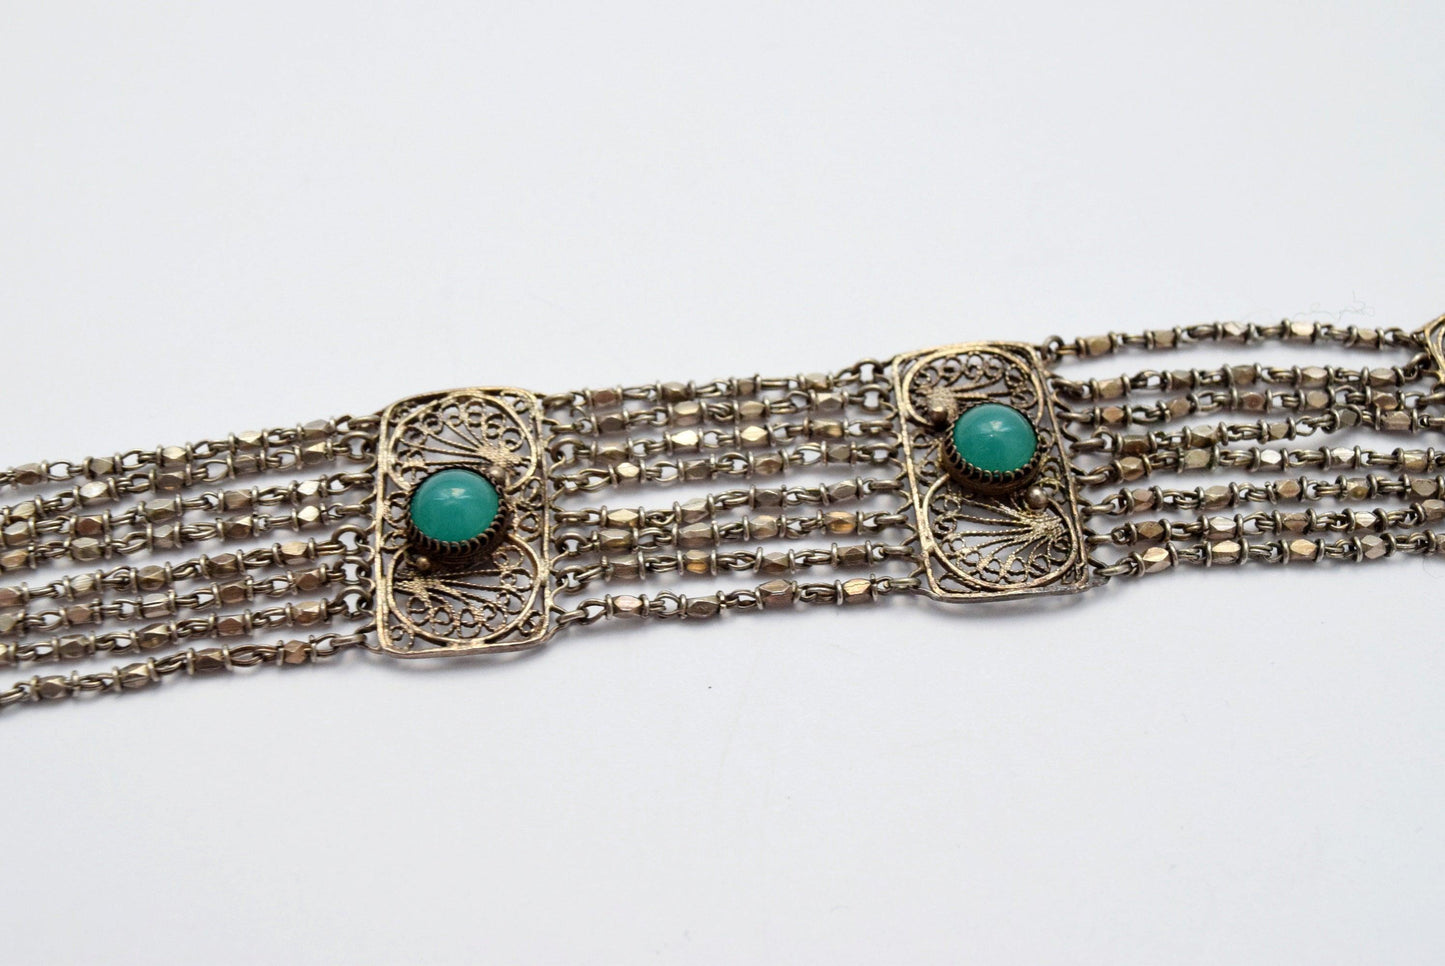 Silver and green stone bracelet